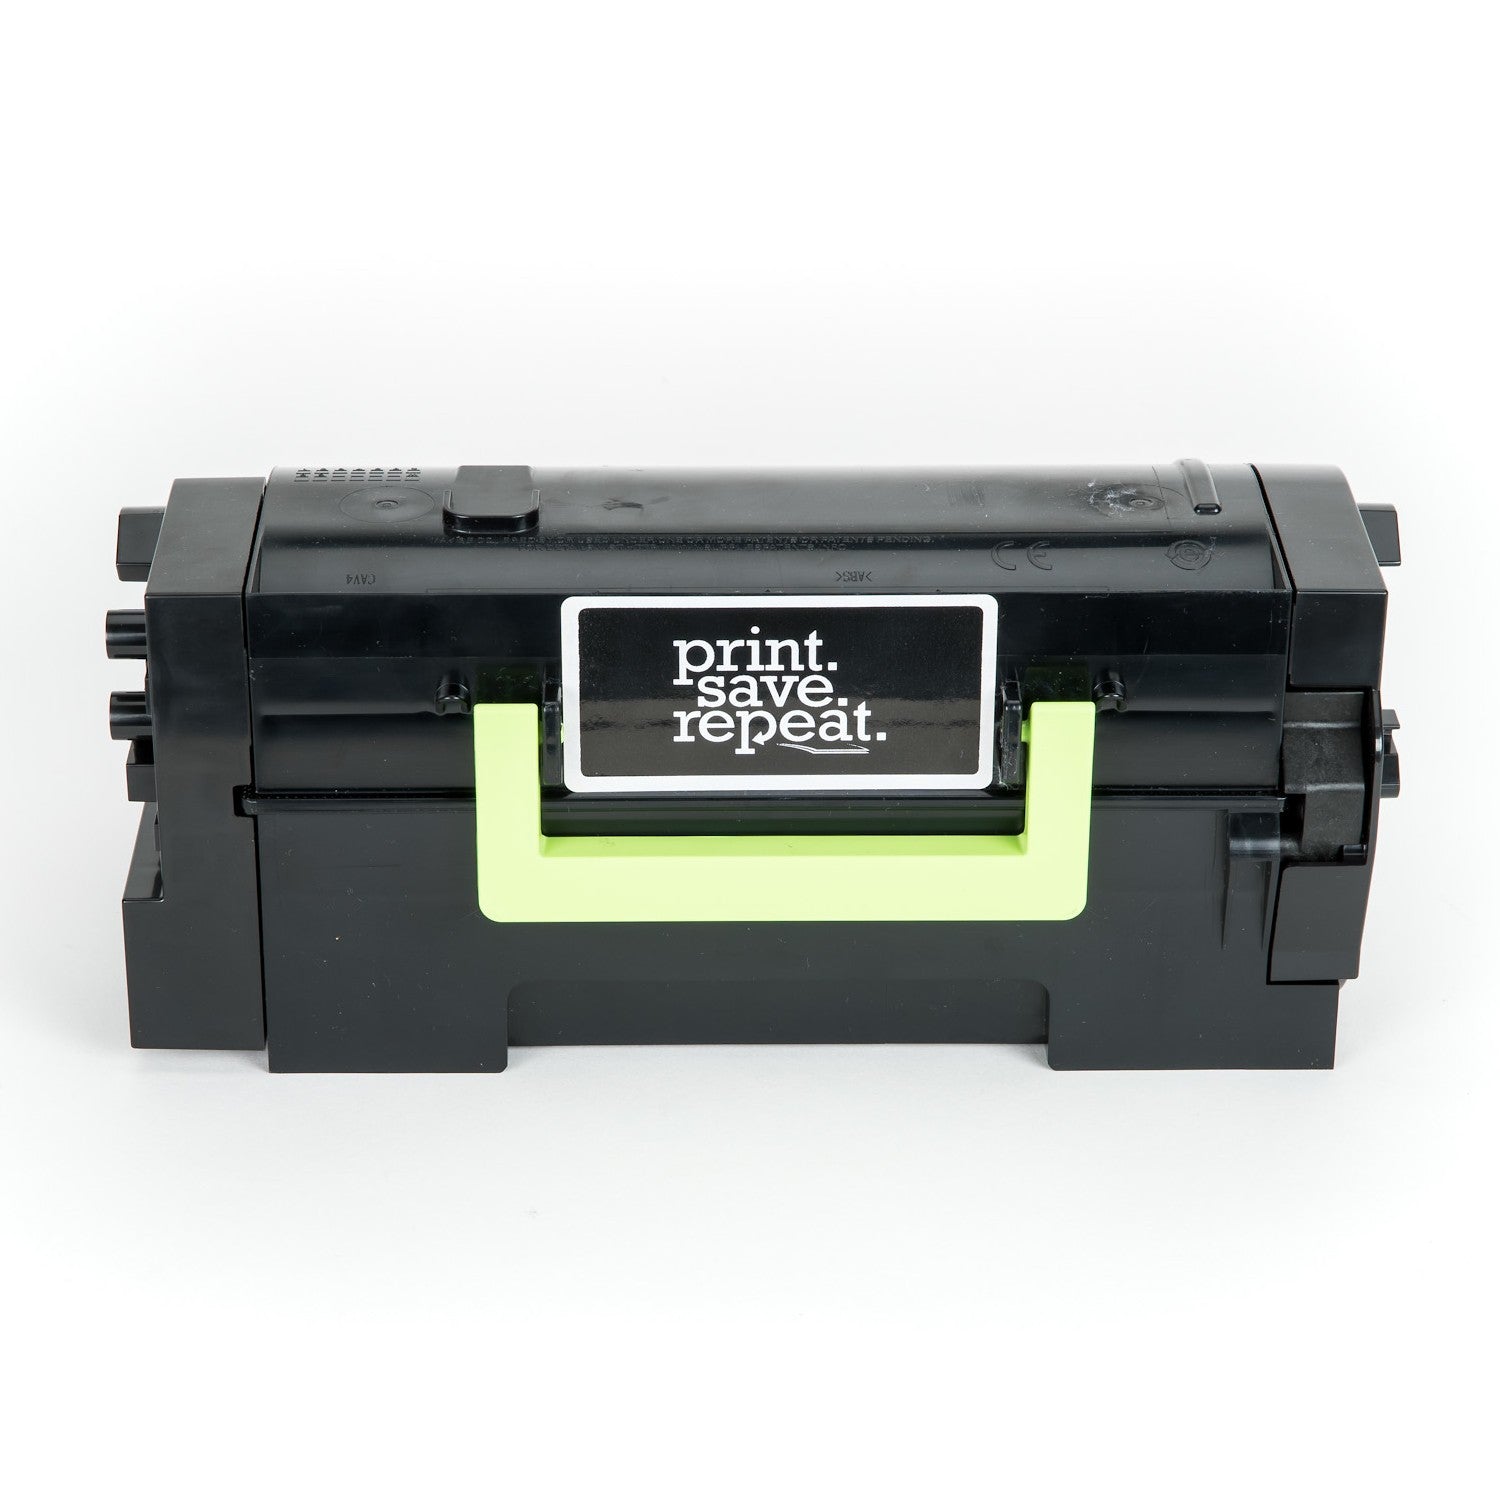 Print.Save.Repeat. Lexmark B281X00 Extra High Yield Remanufactured Toner Cartridge for B2865 [30,000 Pages]